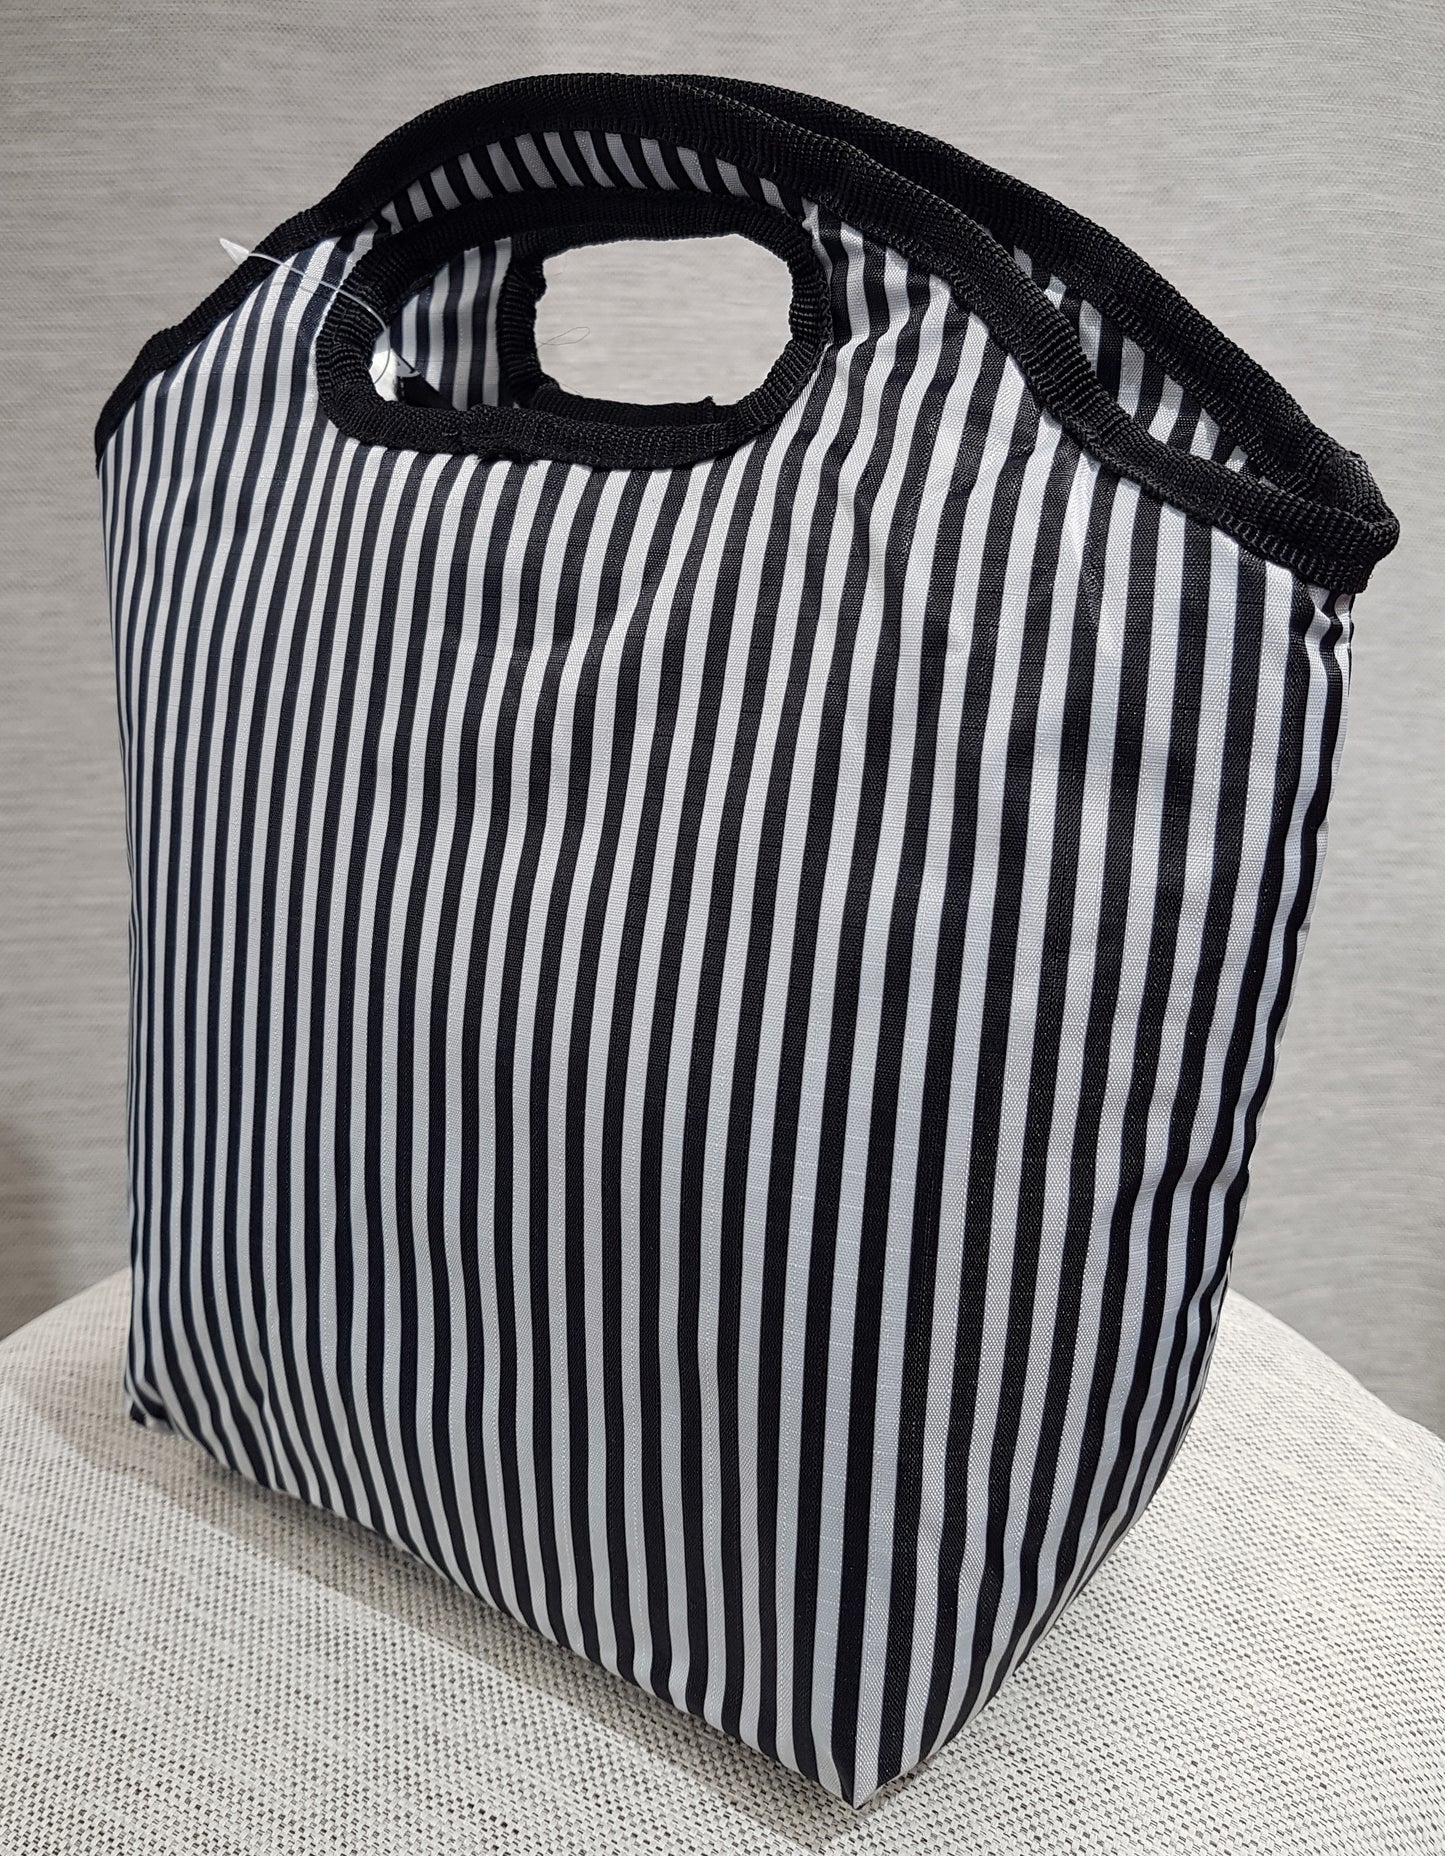 Lunch bag, Style # T-LU21-0002